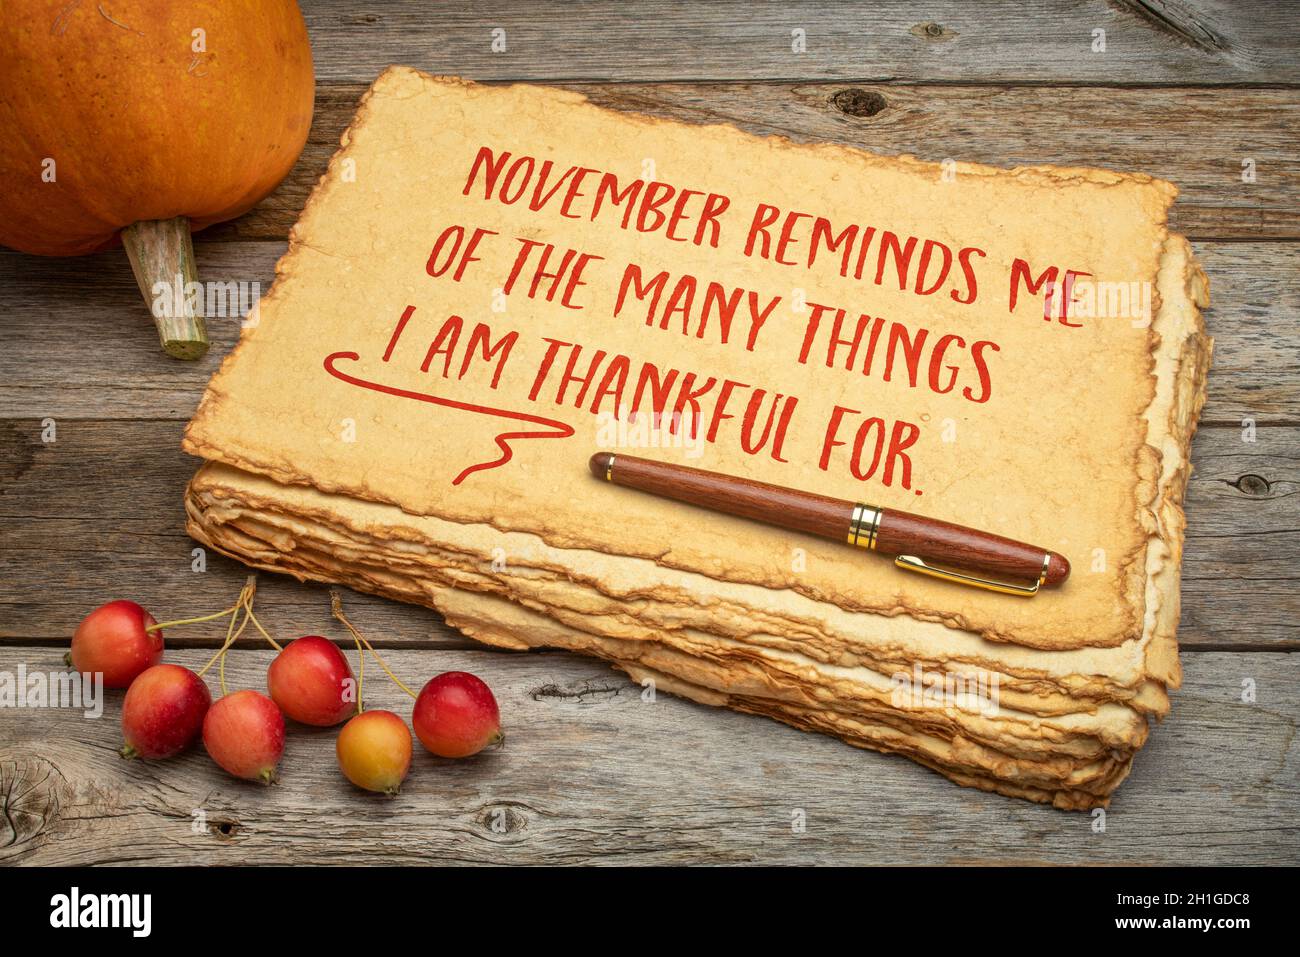 November reminds me of the many things I am grateful for - inspirational words for Thanksgiving, handwriting on a handmade paper with a pumpkin and cr Stock Photo